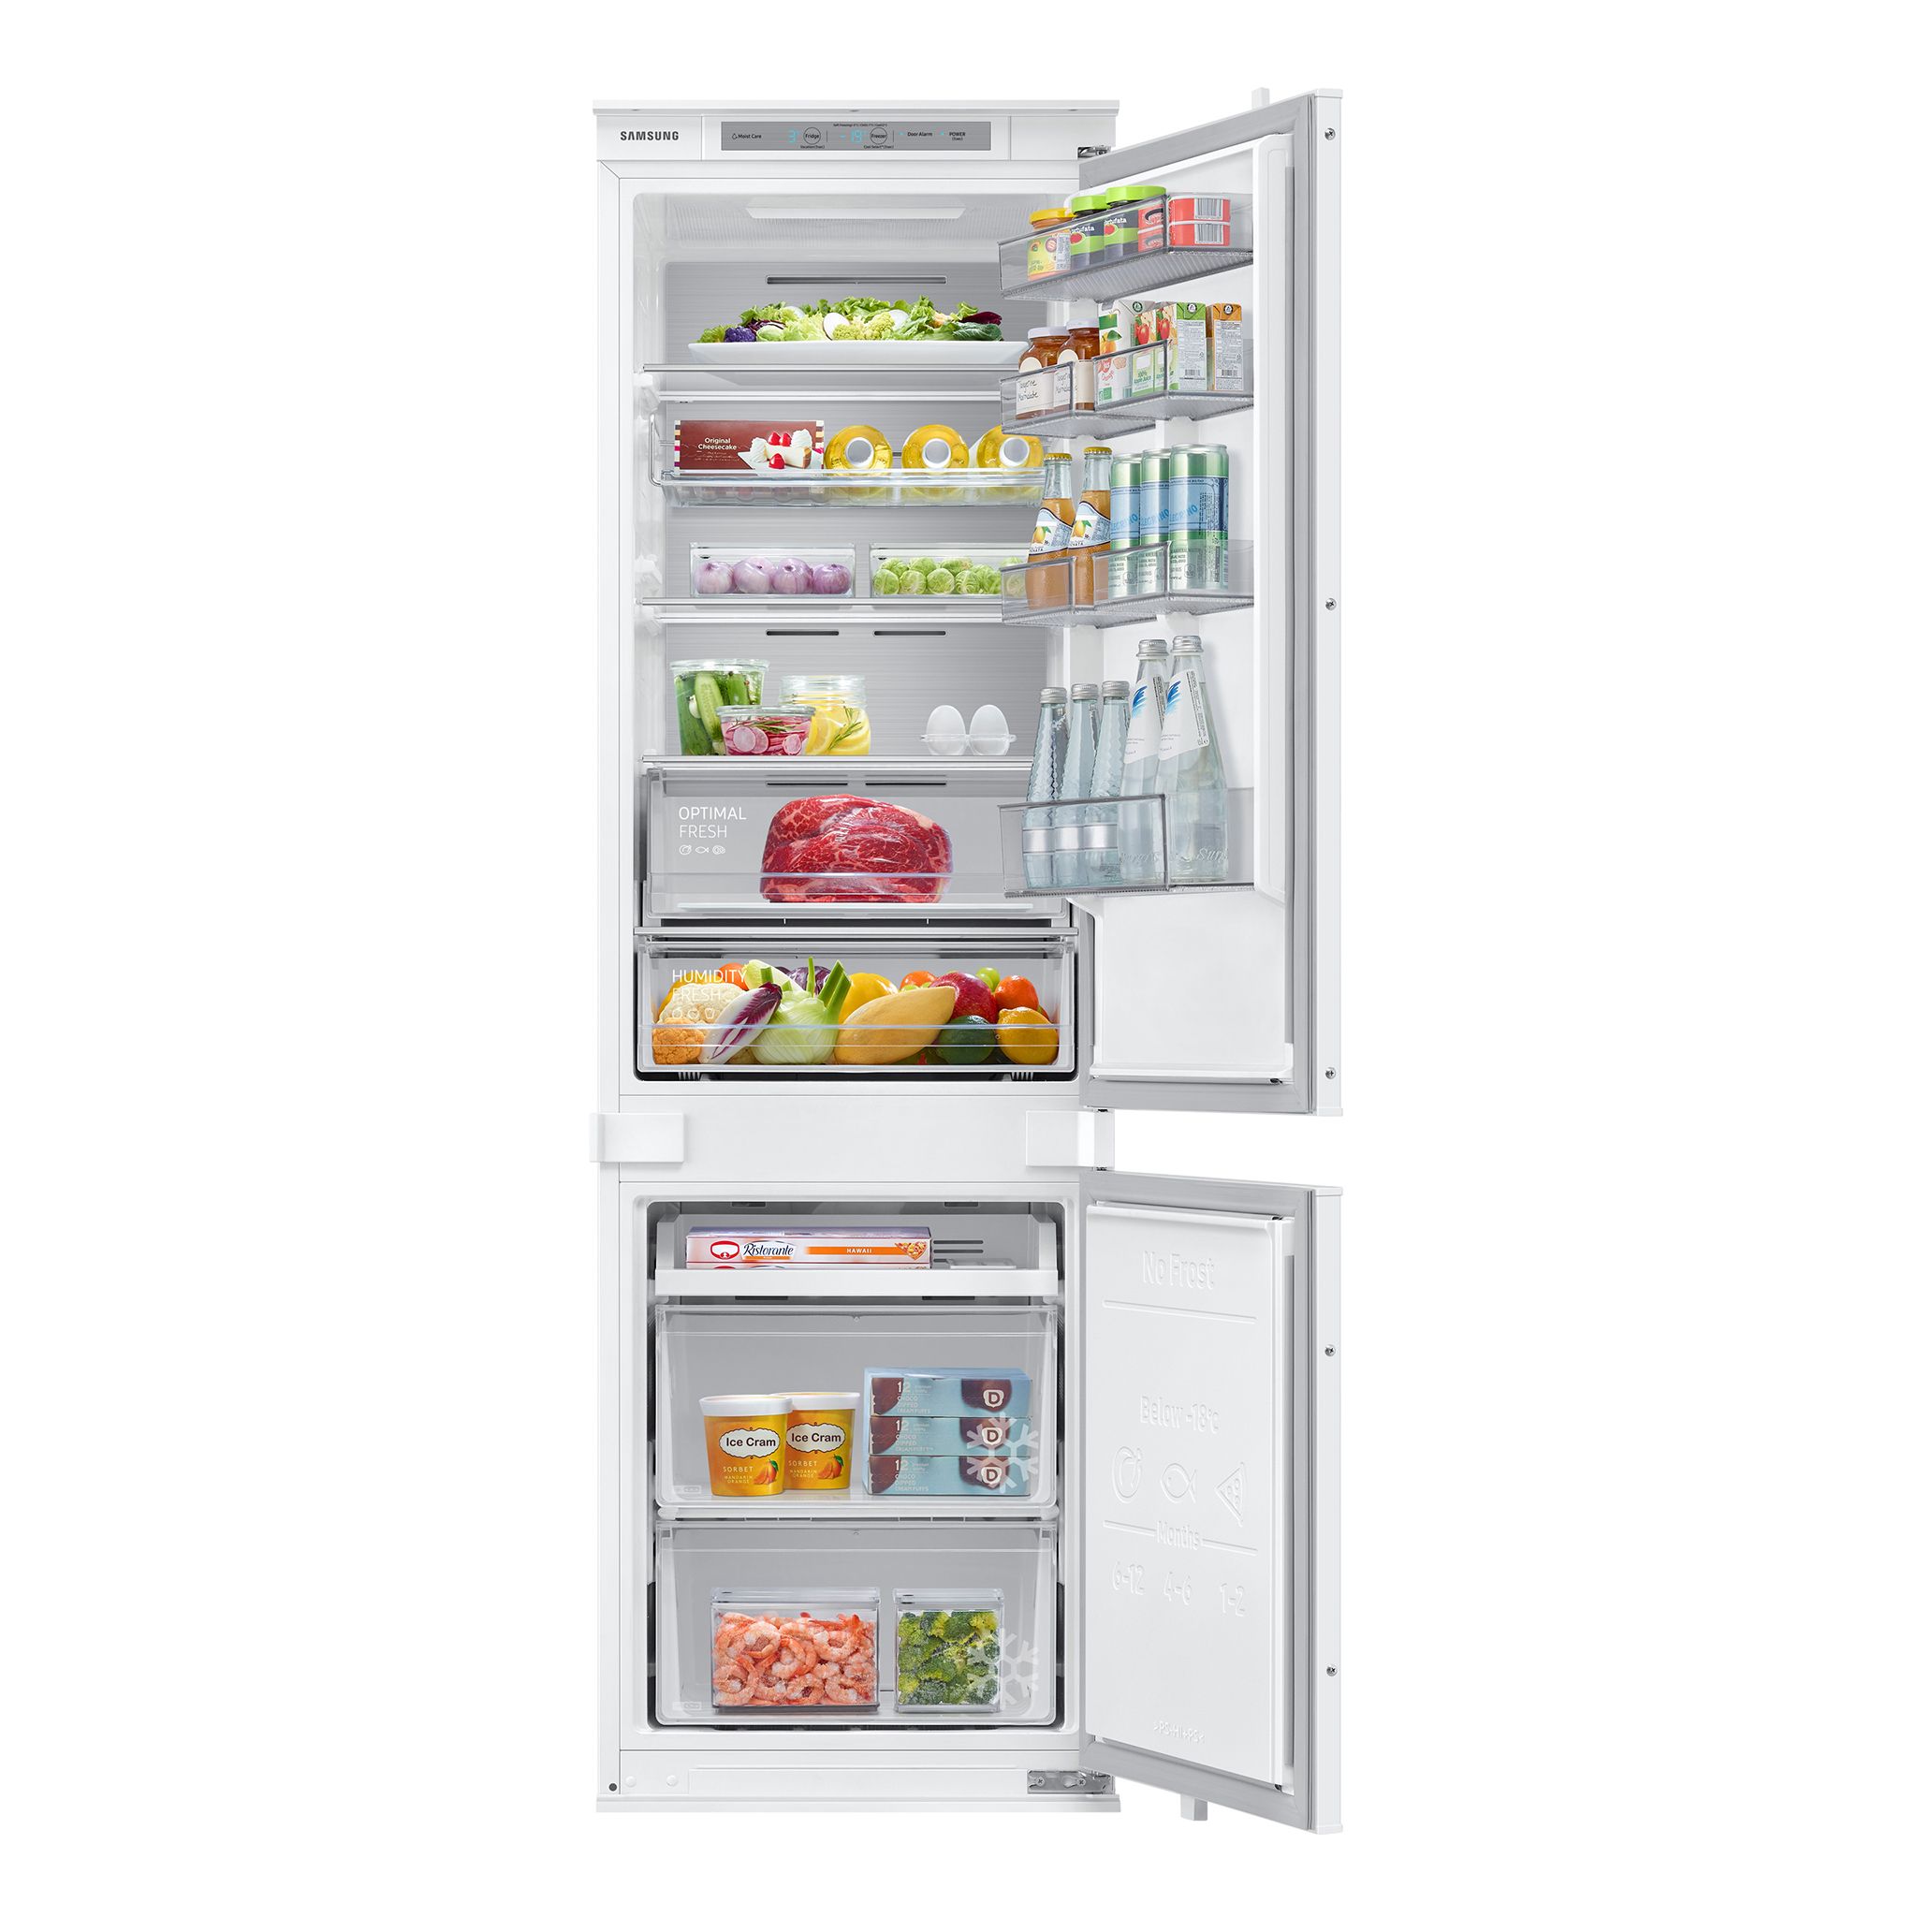 Samsung BRB26705DWW_WH Built-in Frost free Fridge freezer - White